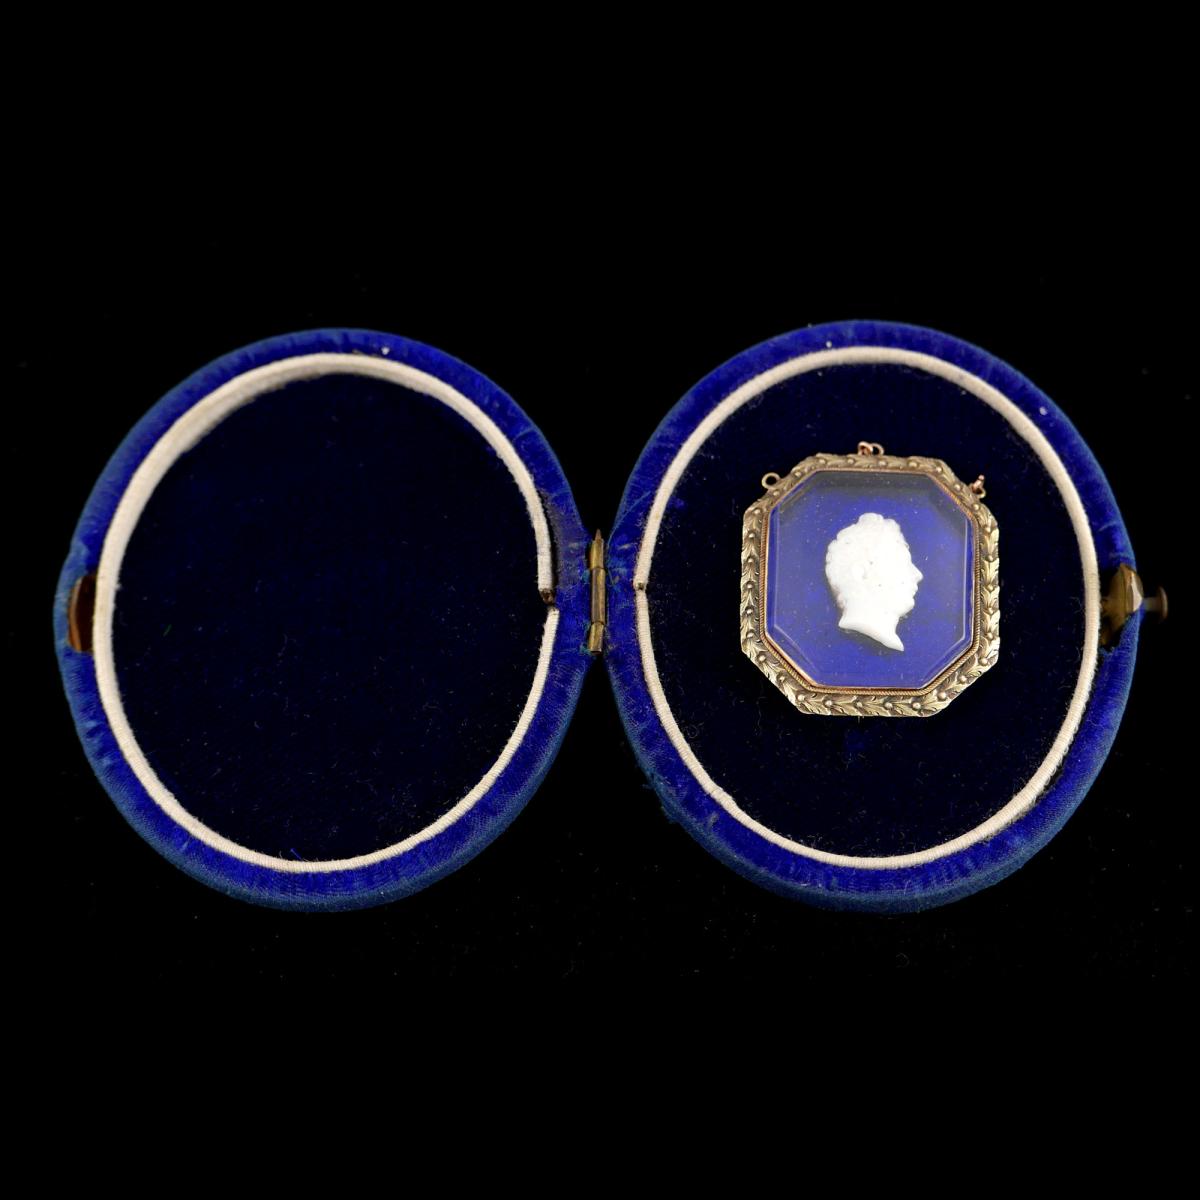 A Profile Portrait Brooch of George IV, 1820